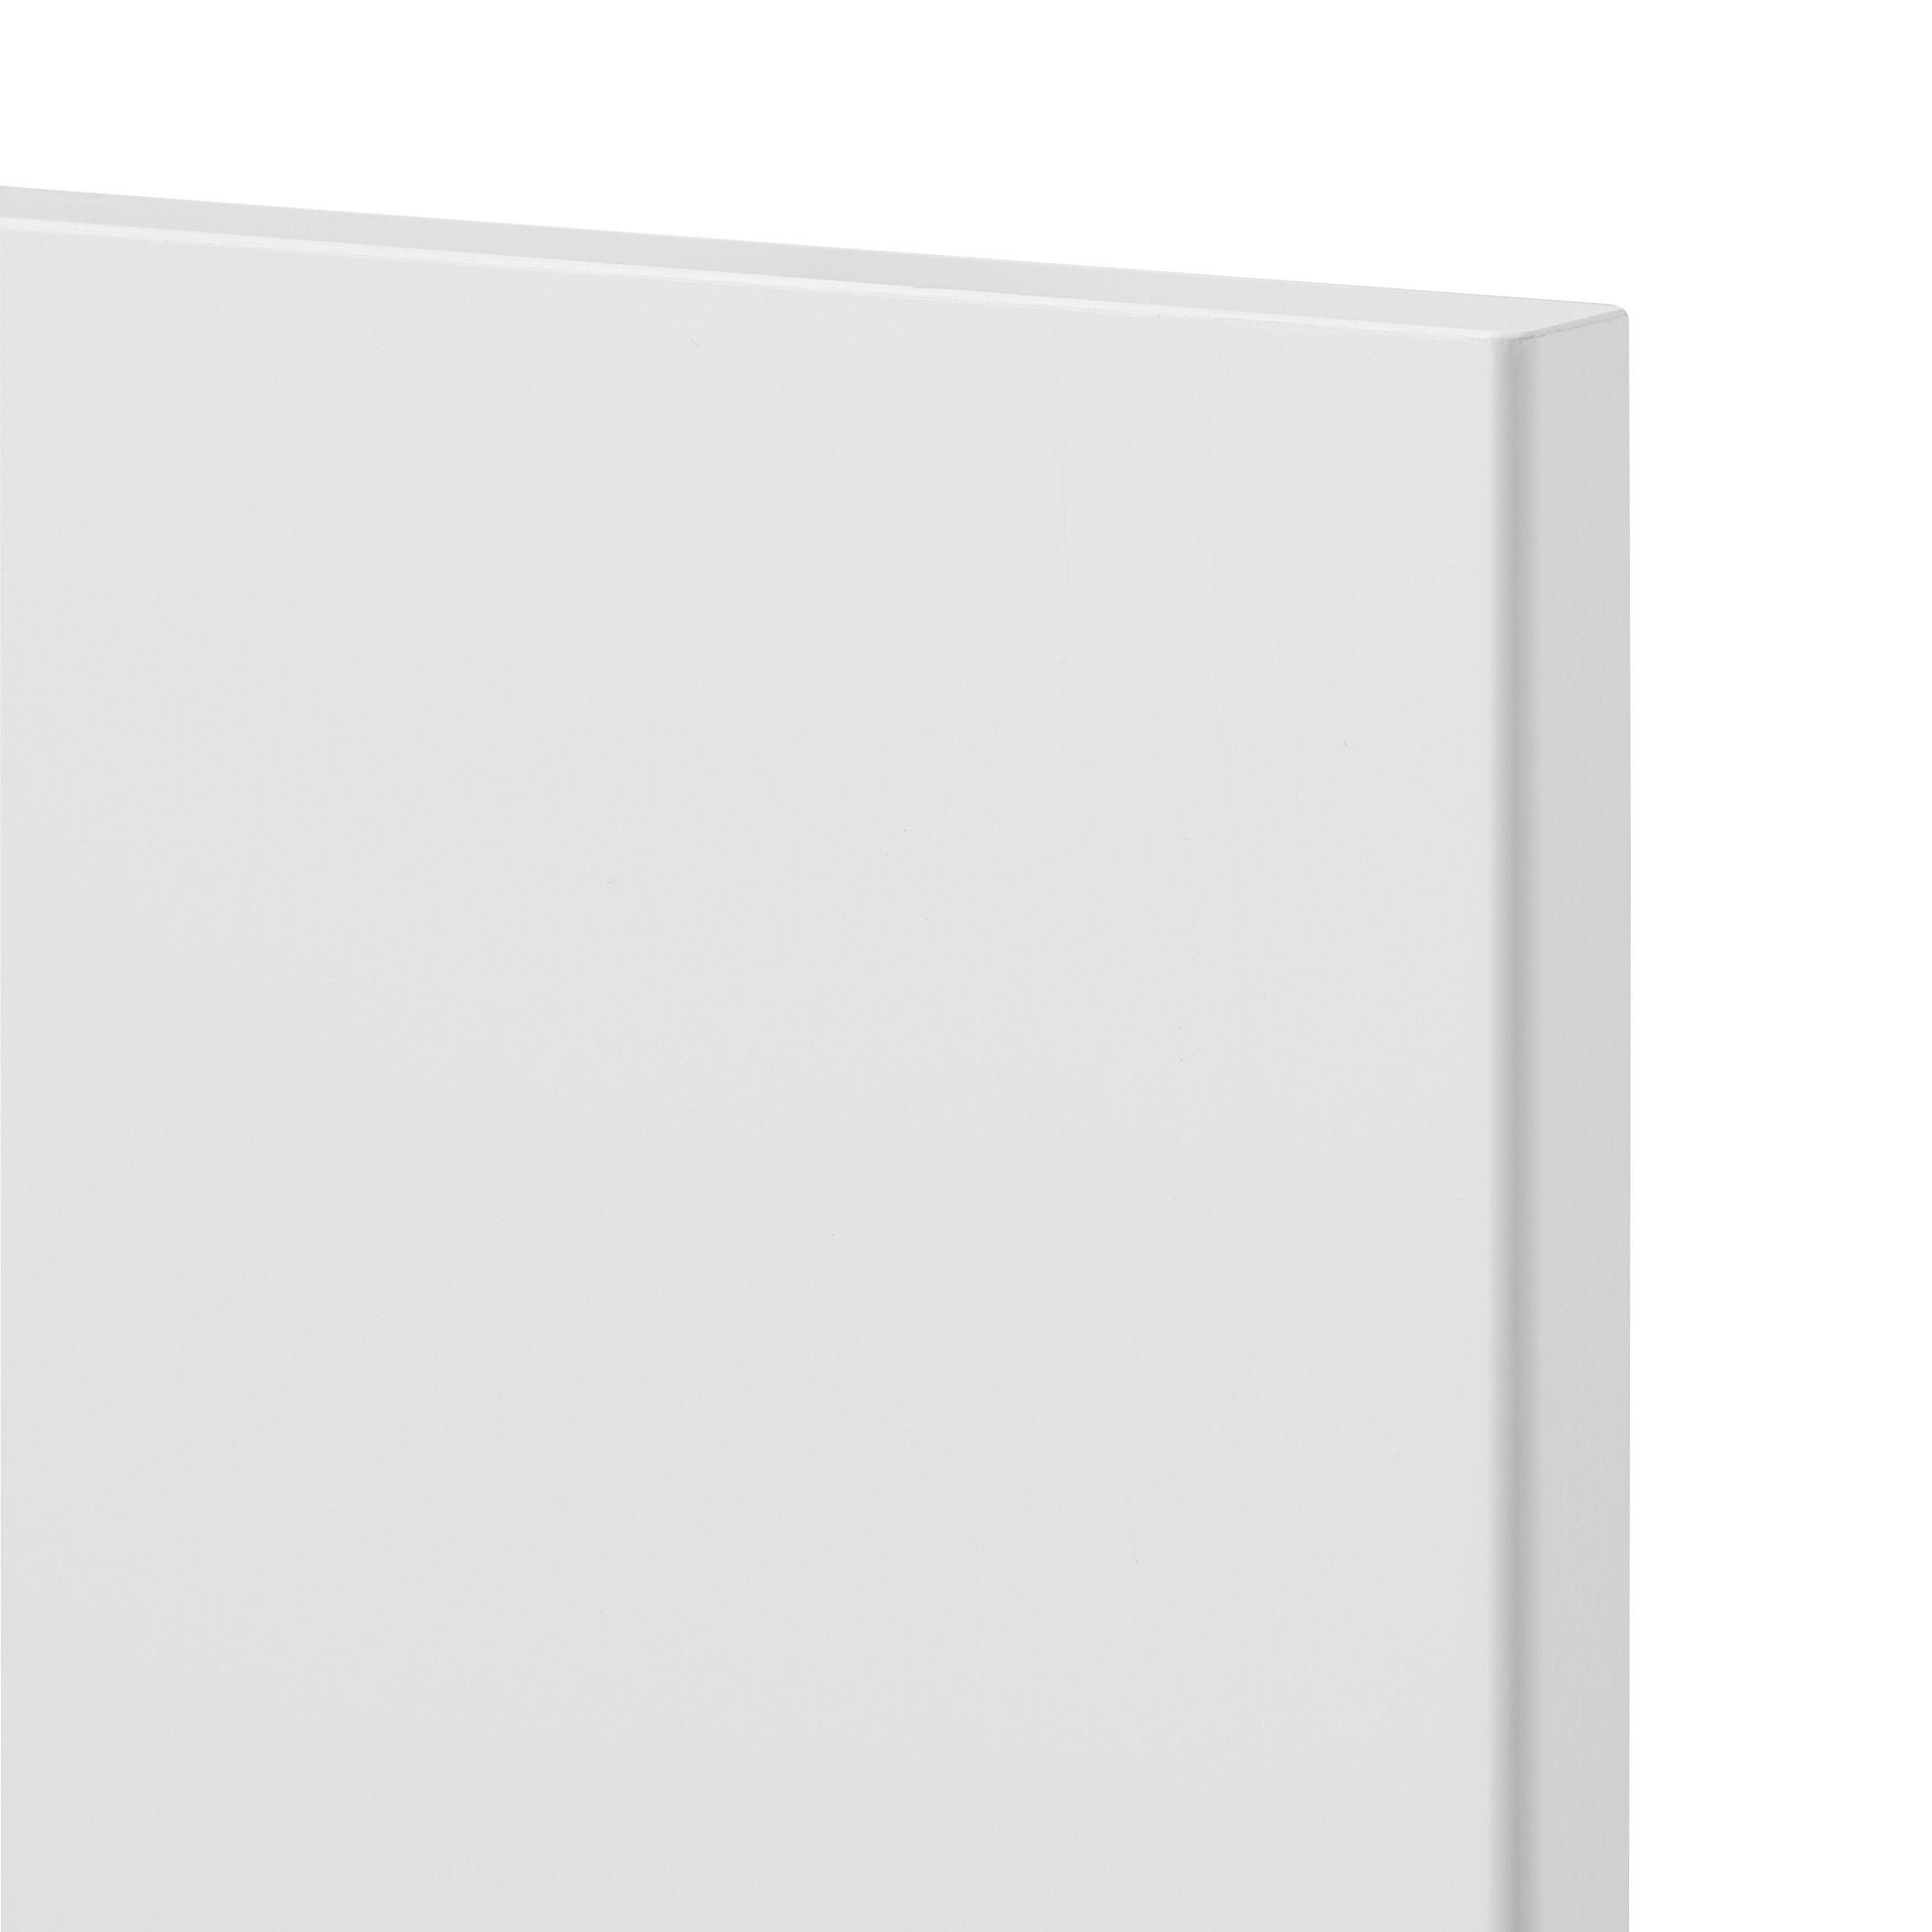 GoodHome Stevia Gloss white slab Drawer front (W)600mm, Pack of 3